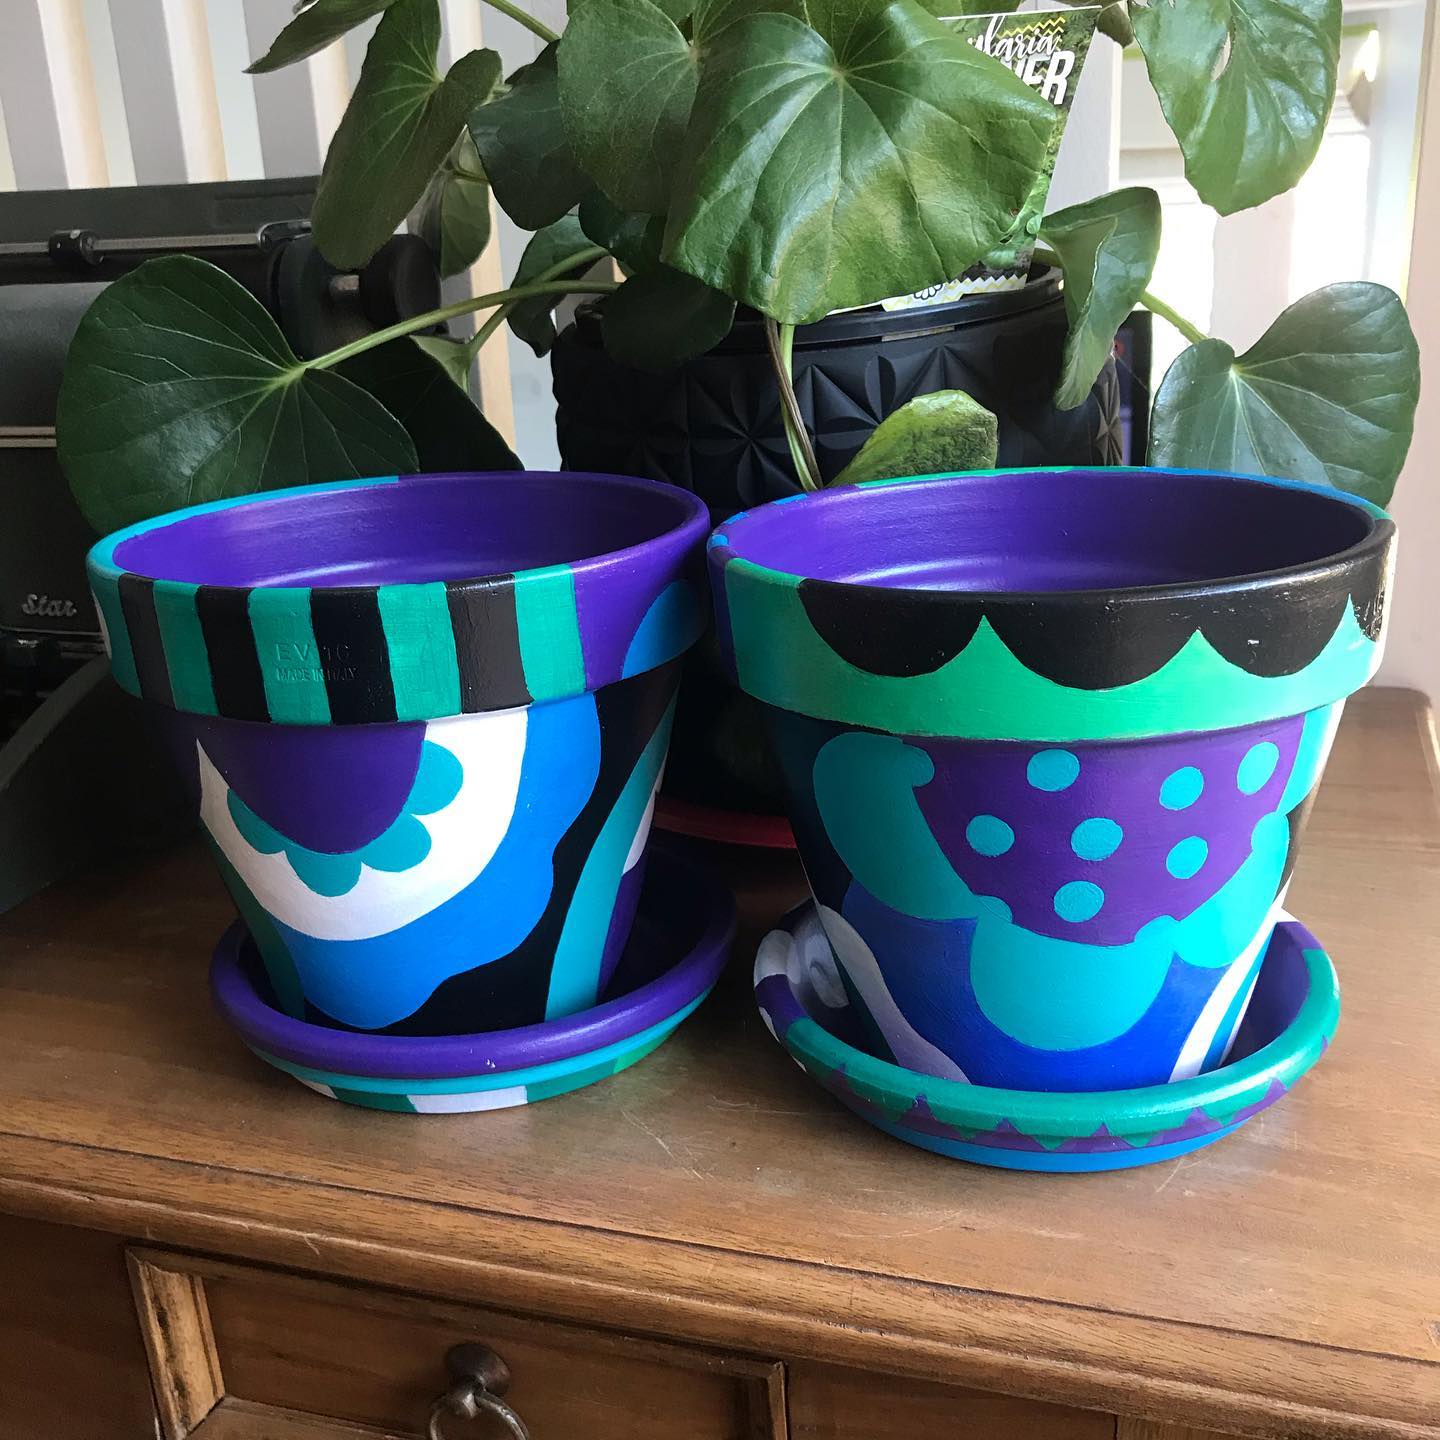 Painted pots by Tazi